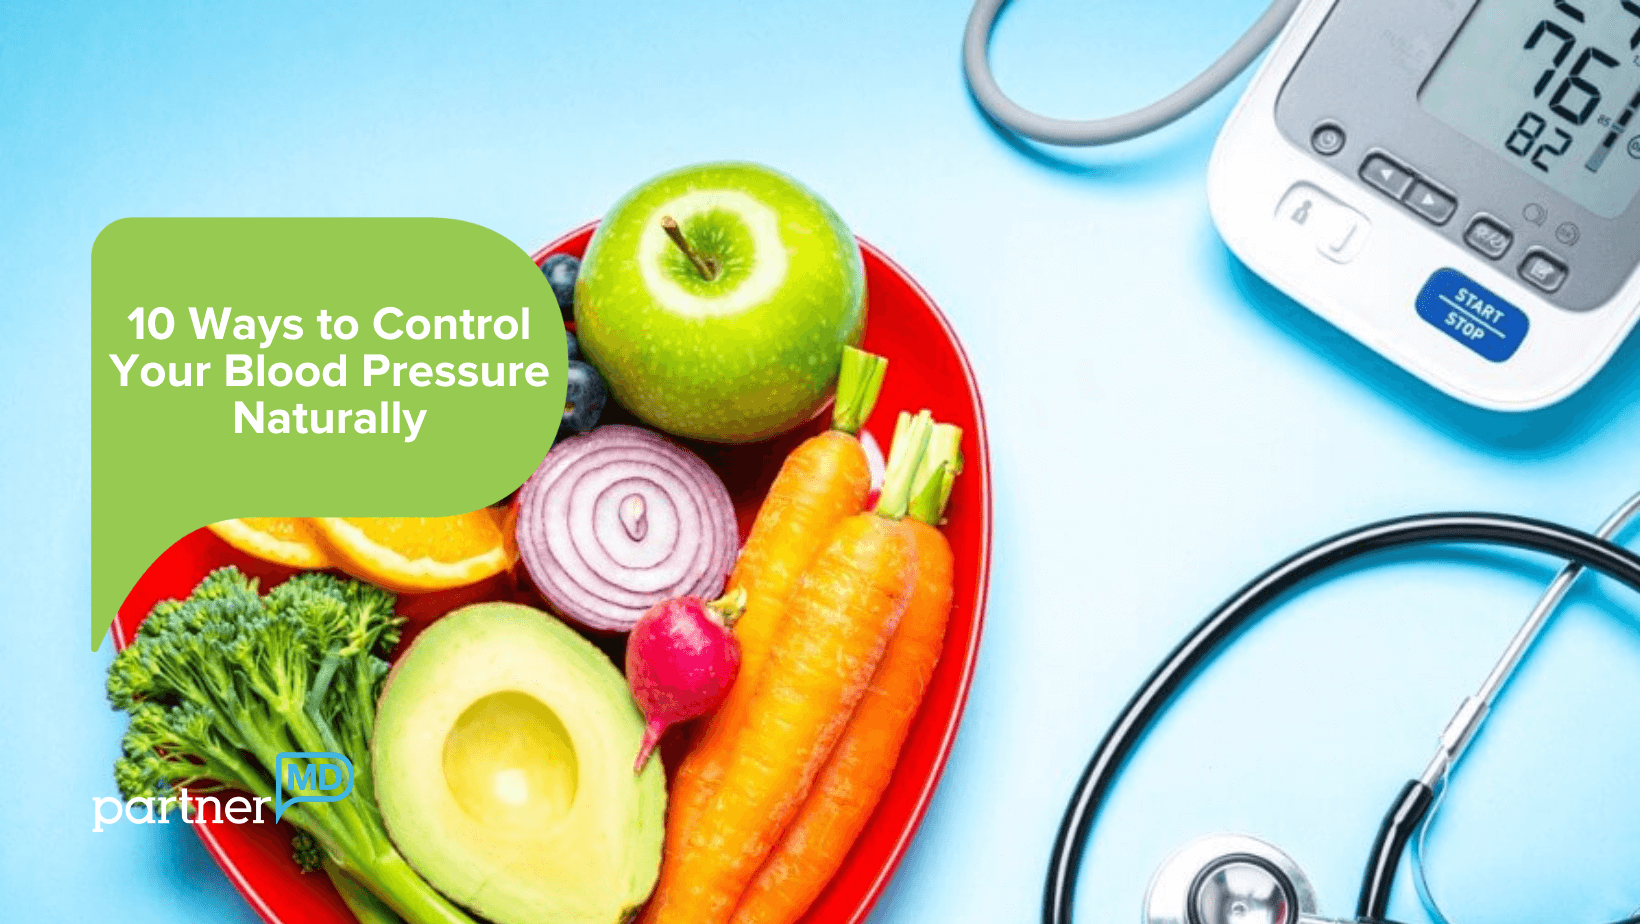 10 Ways to Control Your Blood Pressure Naturally